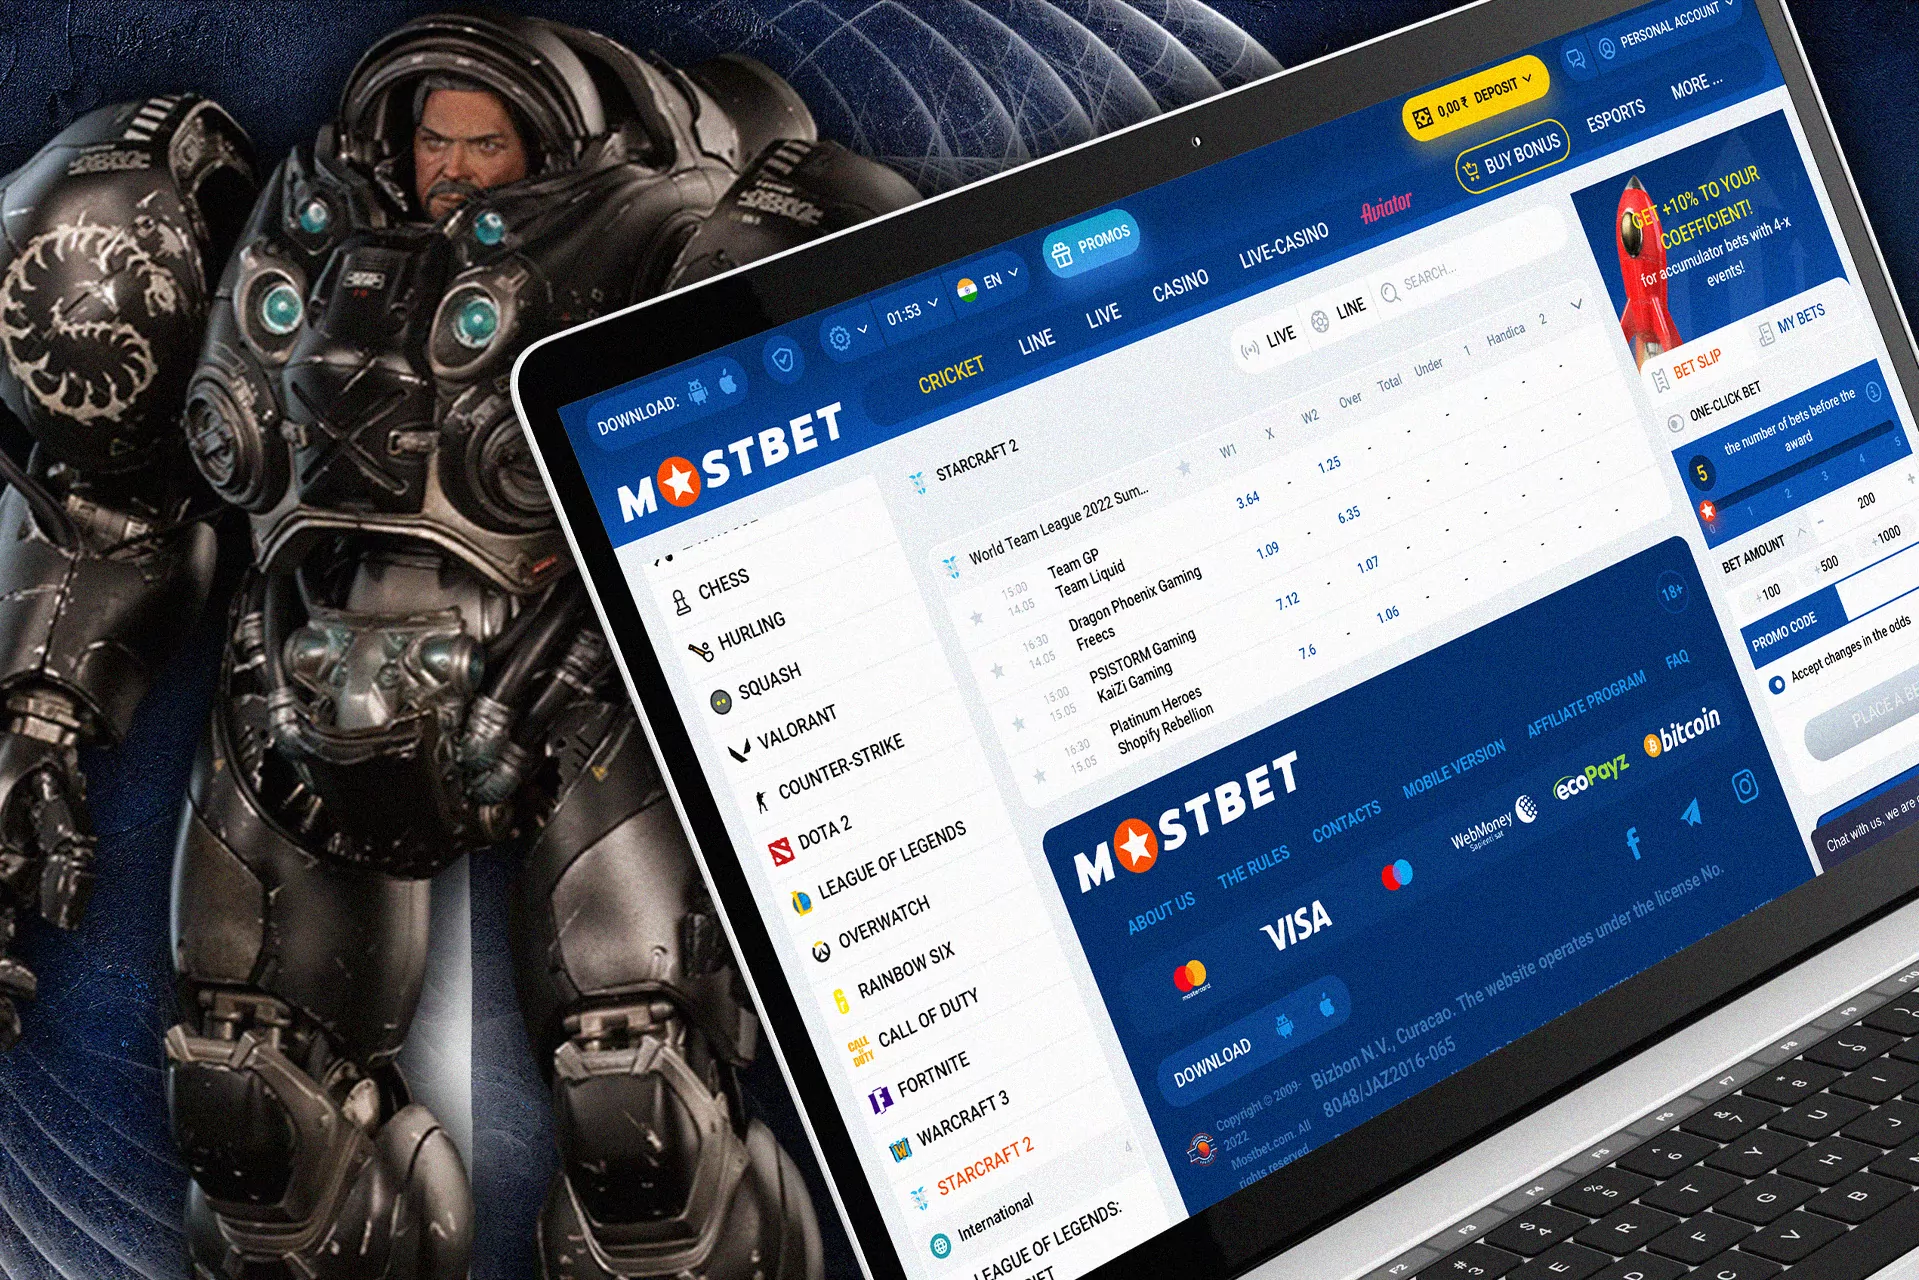 Bet on Starcraft 2 with ease.